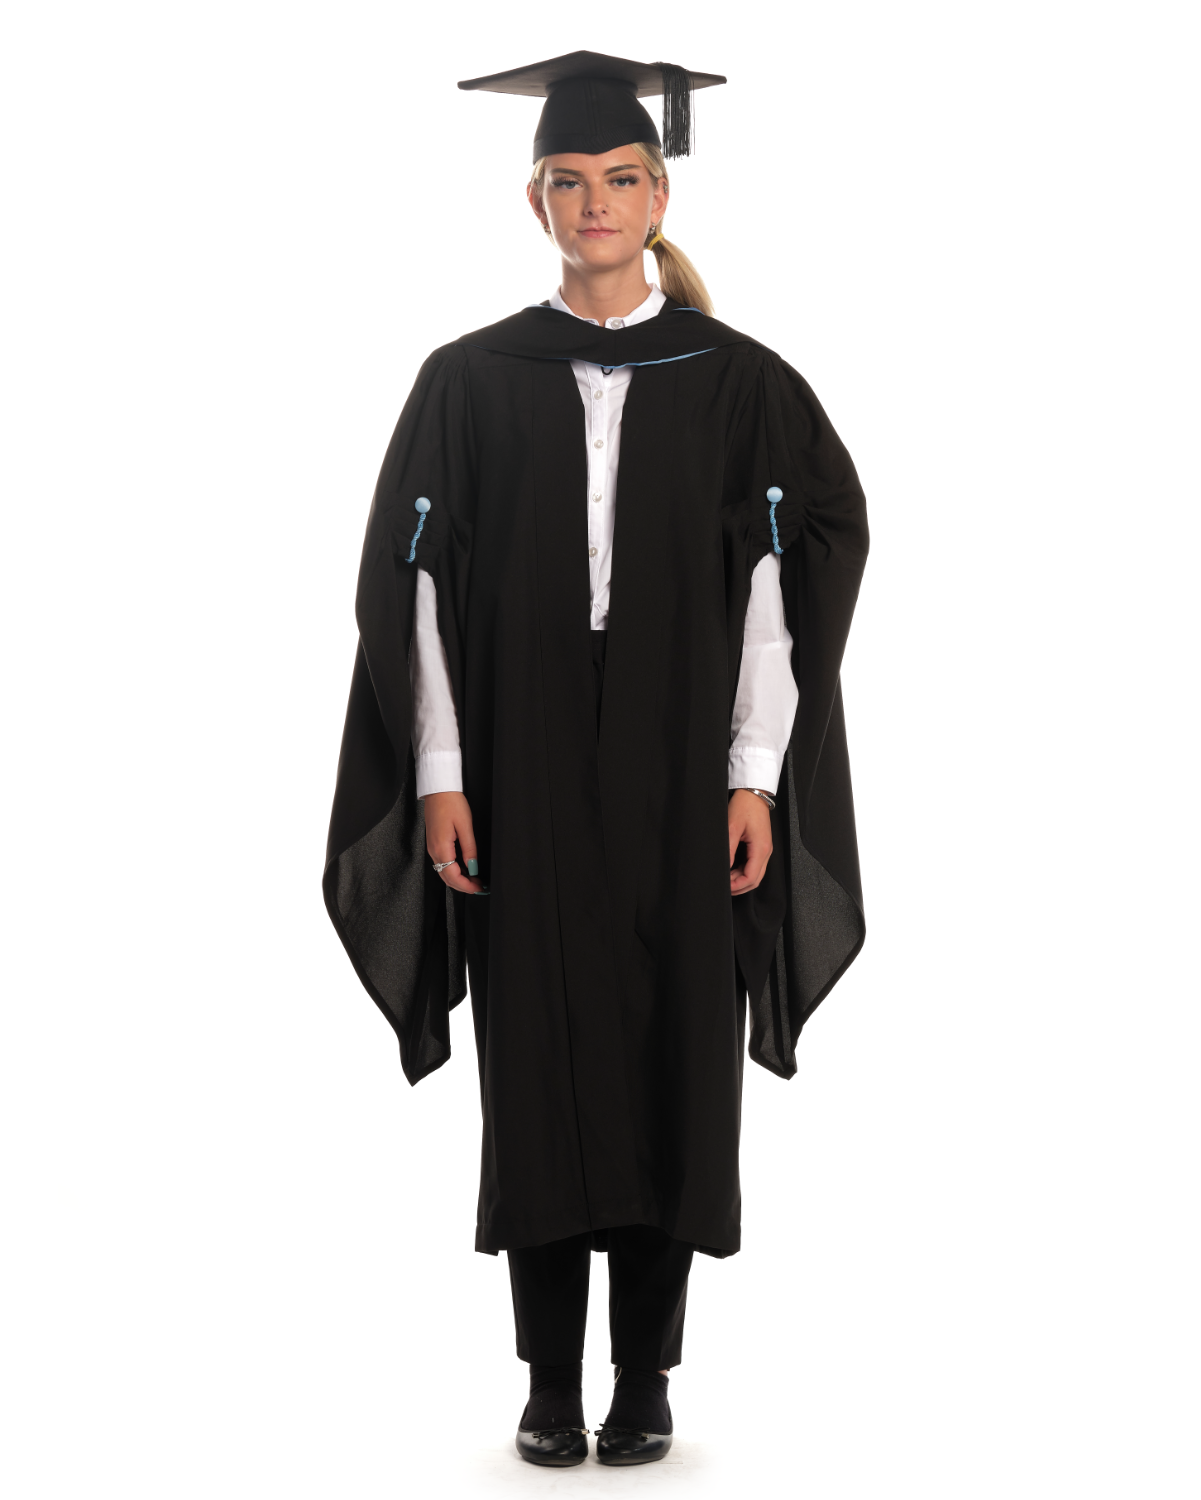 University of Southampton | MSci | Master of Science (Integrated) Gown, Cap and Hood Set